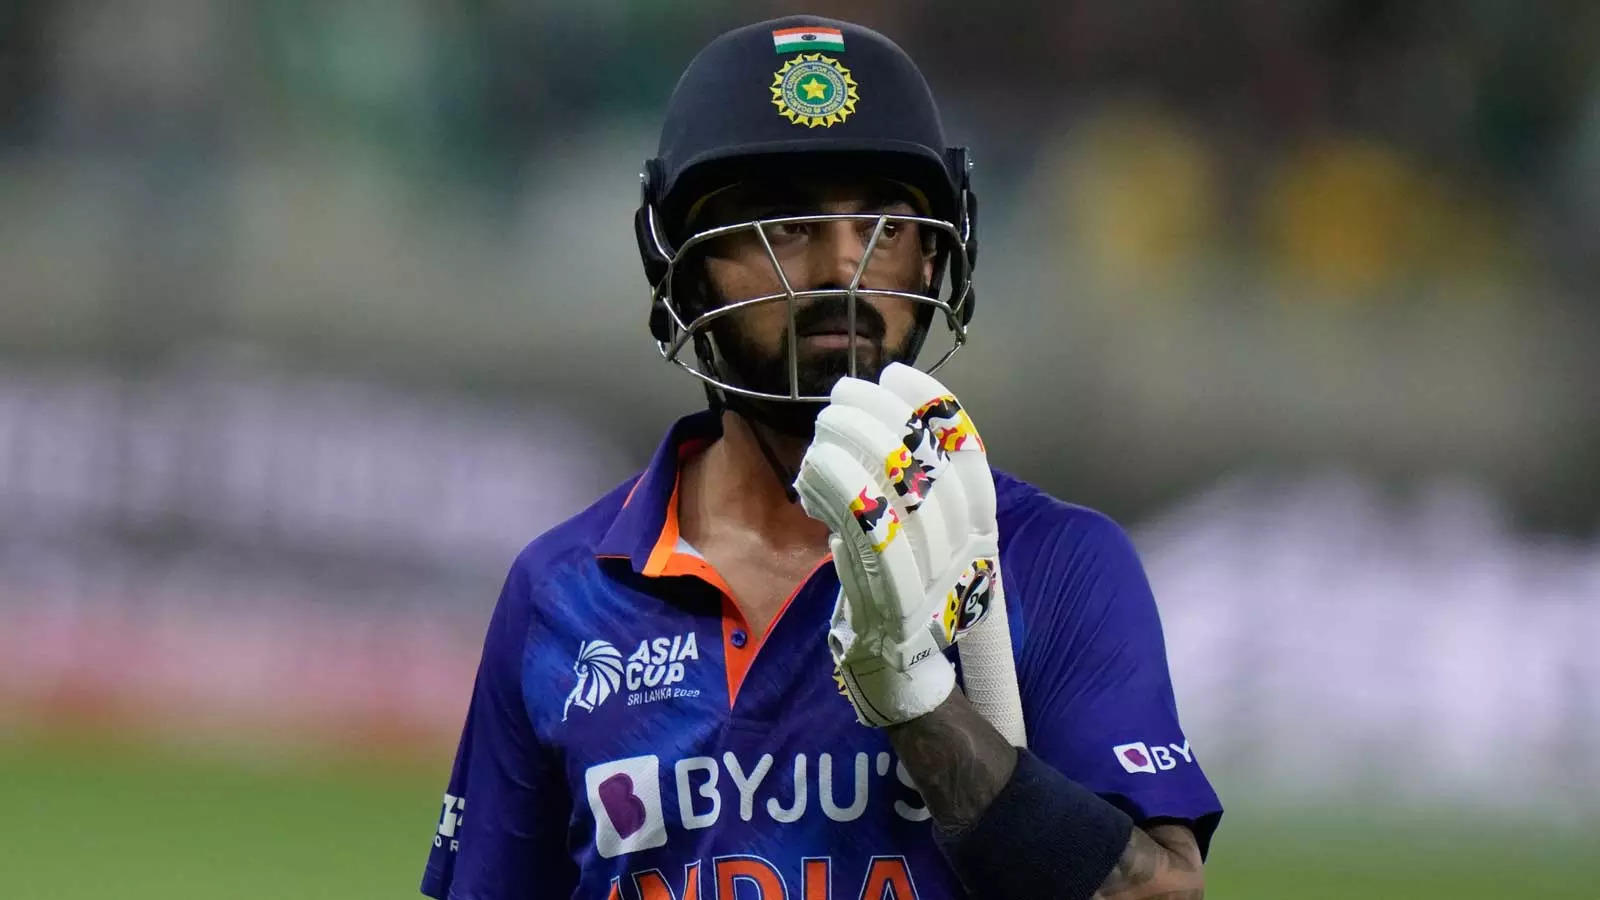 Asia Cup 2022: KL Rahul's knock will be key to India's chances for Pakistan game, says Aakash Chopra